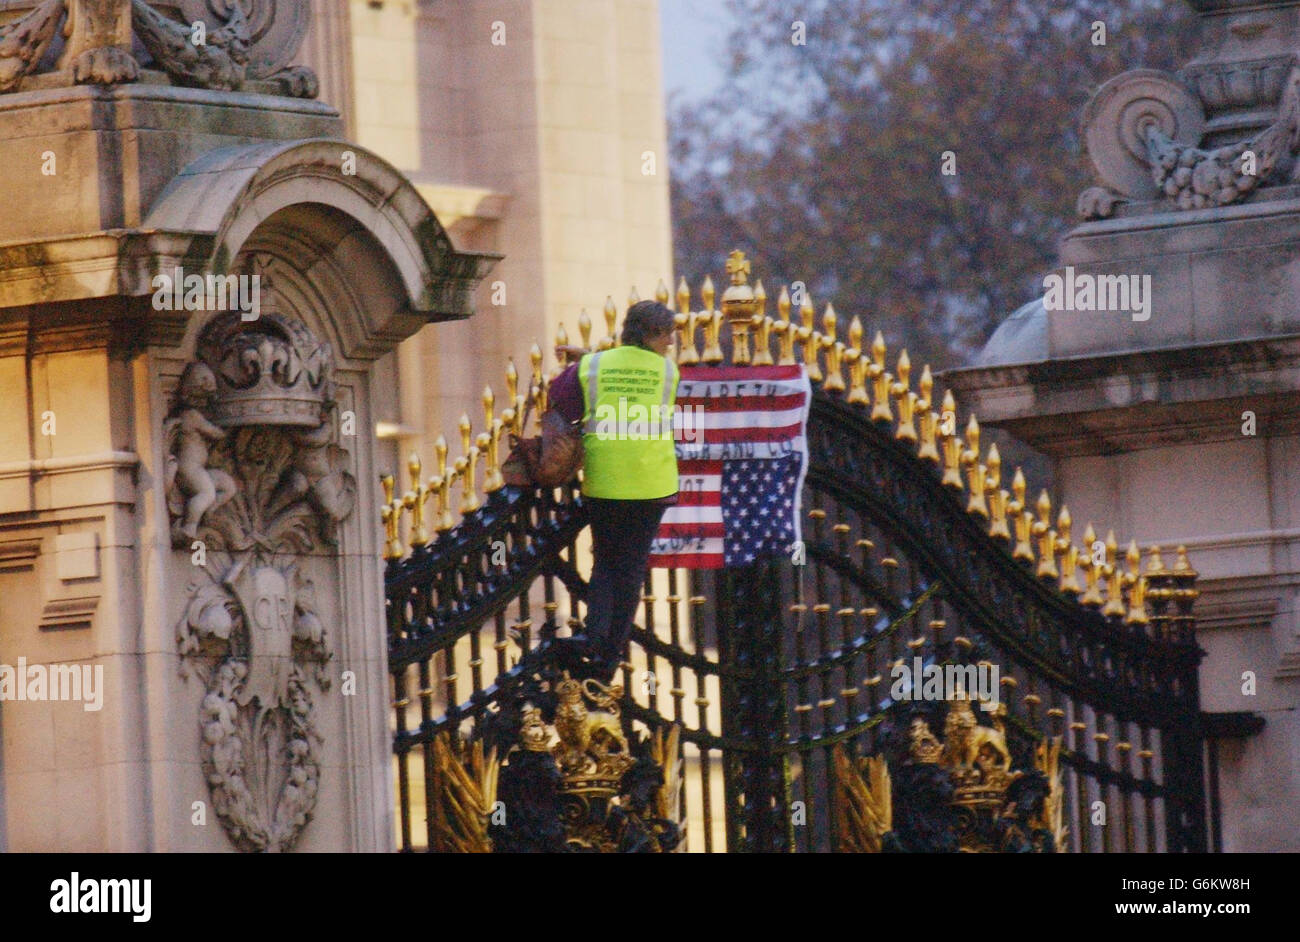 A protester stands on the gates of Buckingham Palace in London after unfurling a banner and what appeared to be a US flag carrying a slogan. Passers-by and the media were moved at least 100 metres away from the main gate during the protest by the woman who is believed to be in her 50s, and which came on the eve of US President's George Bush's arrival for his state visit to the UK. President Bush and his wife will be staying in the Palace as guests of The Queen. Stock Photo